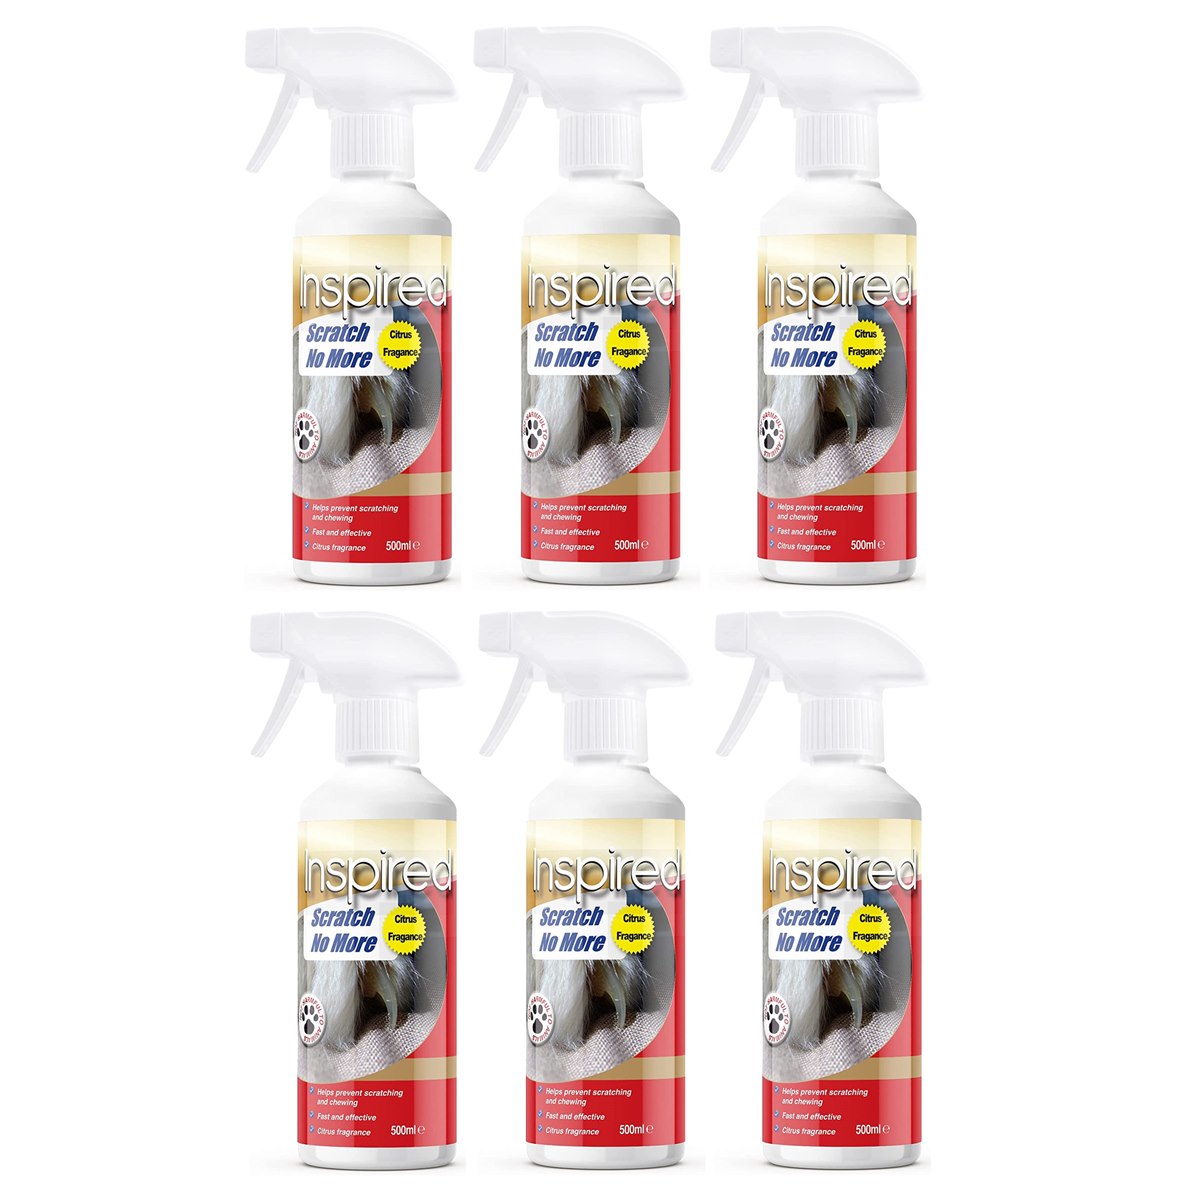 Case of 6 x Inspired Scratch No More Spray 500ml